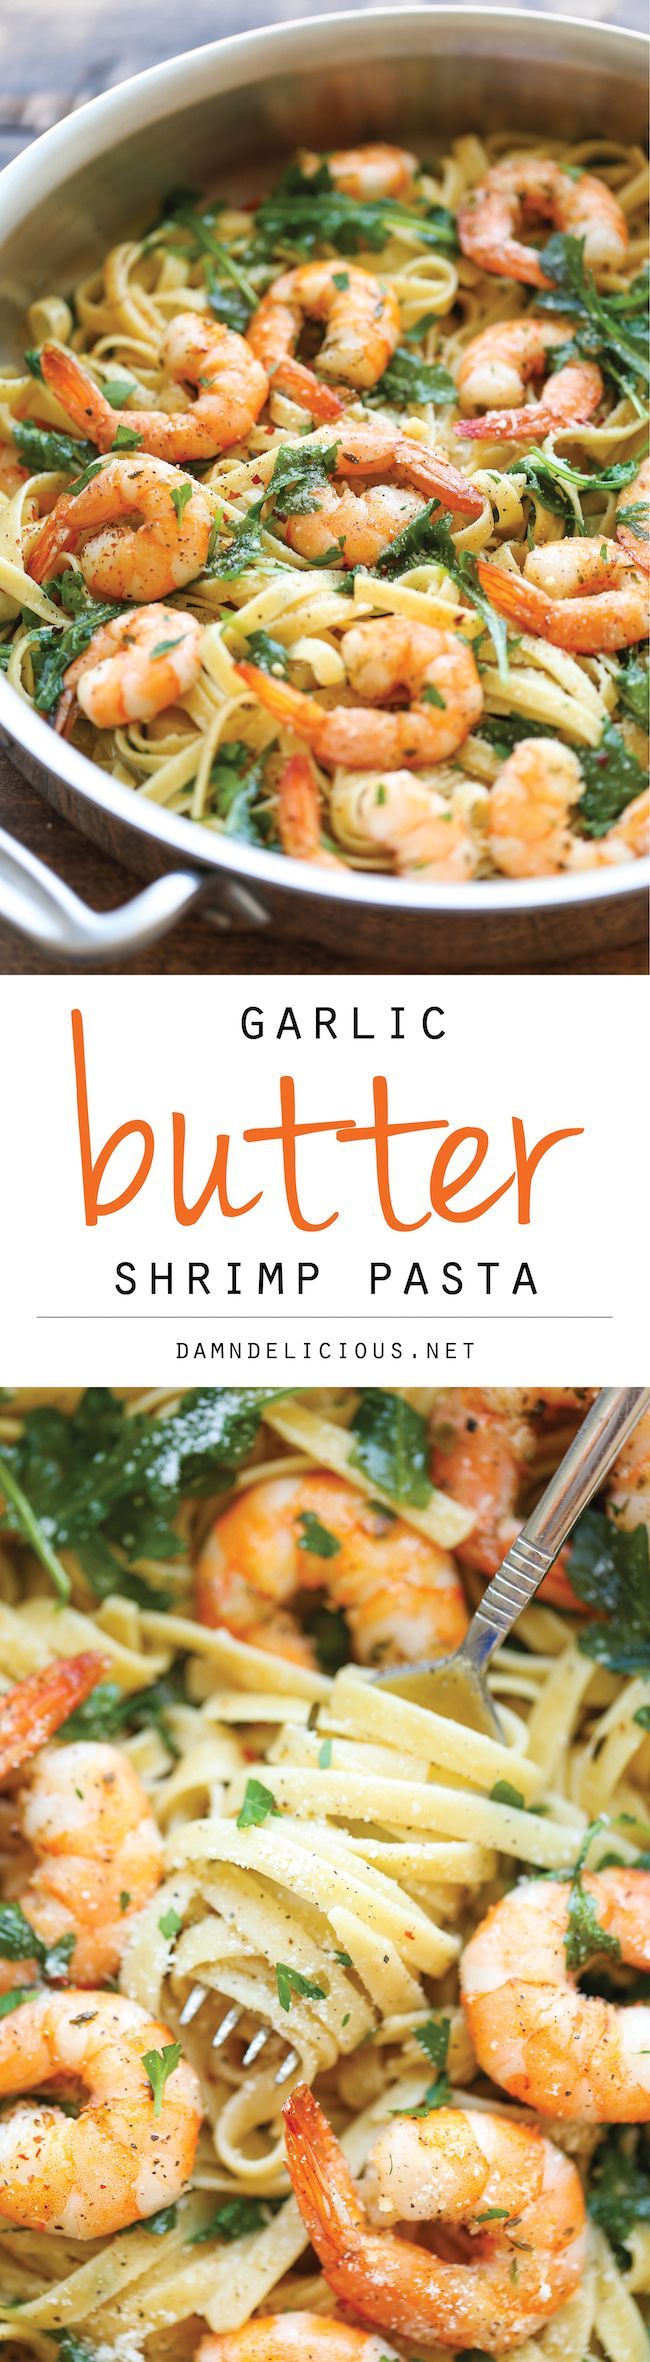 Garlic Butter Shrimp Pasta – An easy peasy pasta dish that’s simple, flavorful and incredibly hearty. And all you need is 20 min